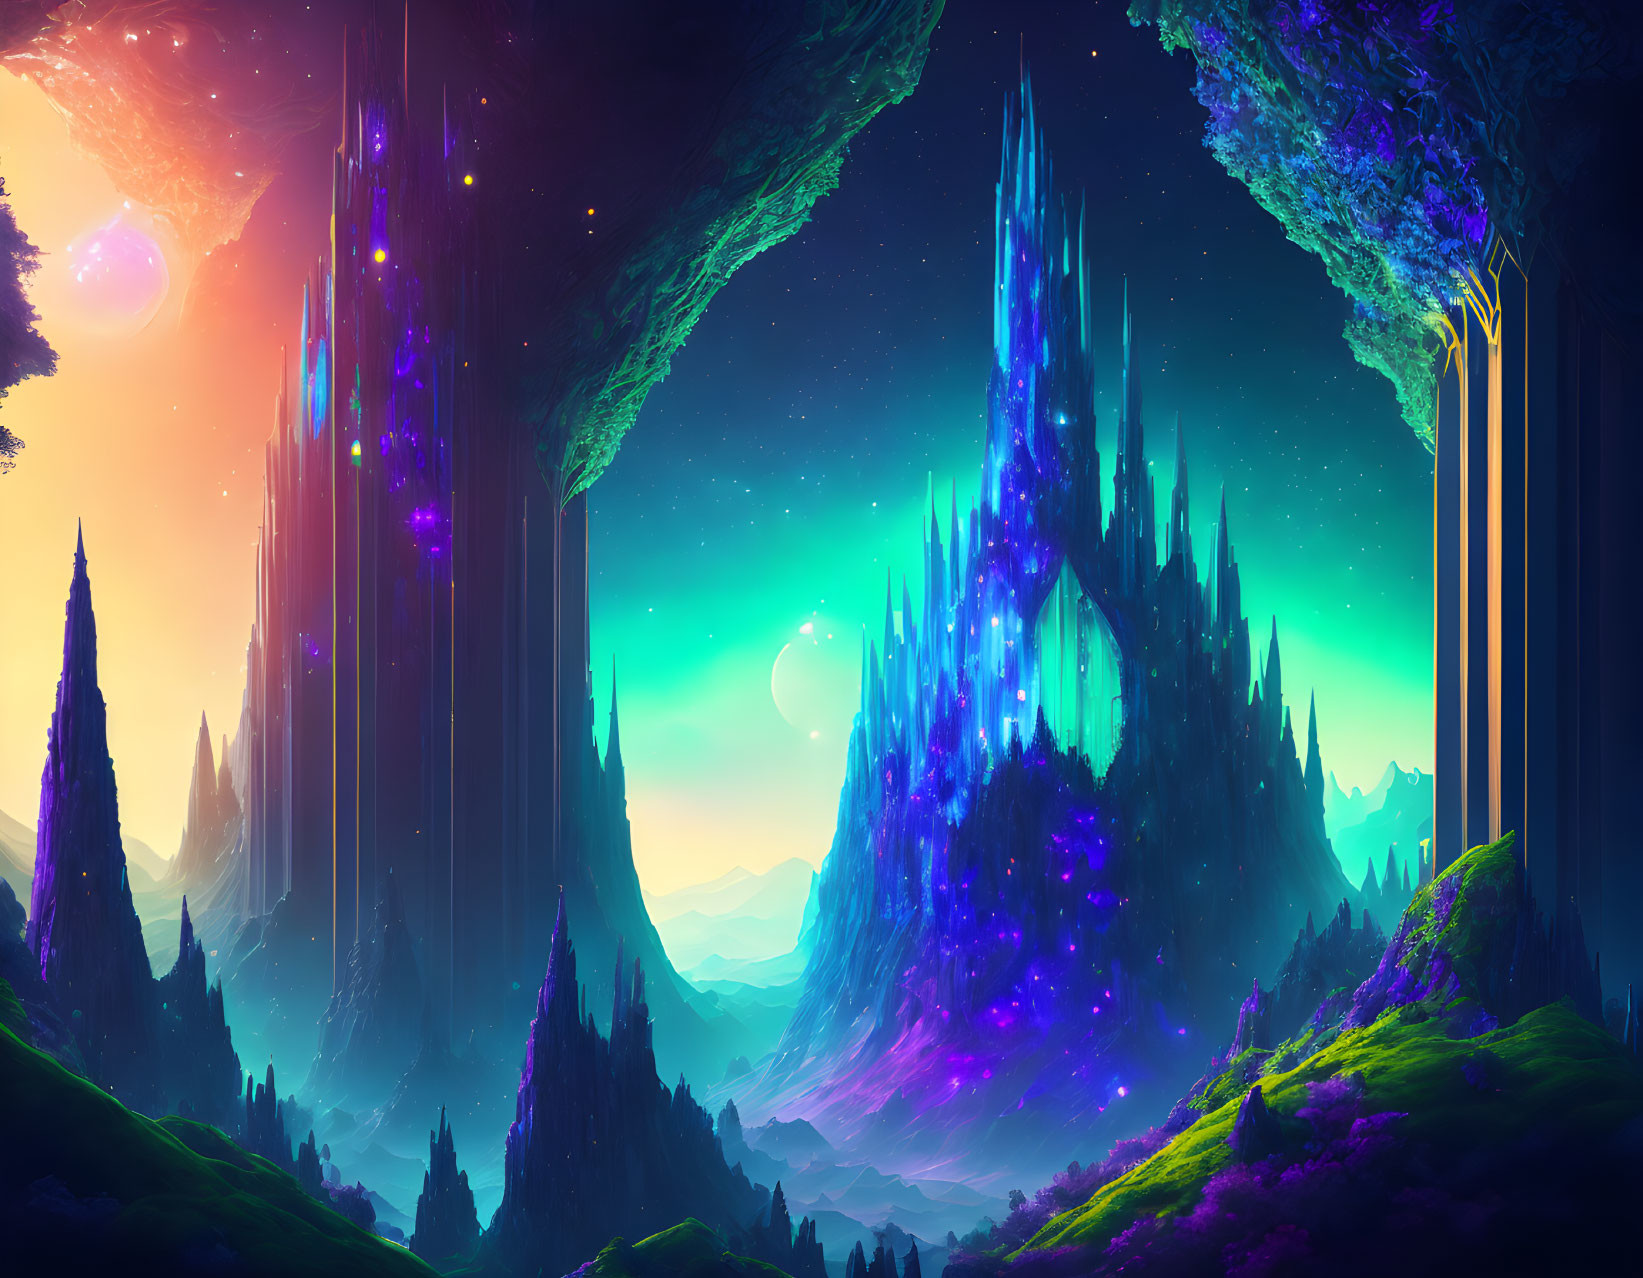 Fantastical landscape with glowing flora, crystalline castle, celestial bodies, and mystical backdrop.